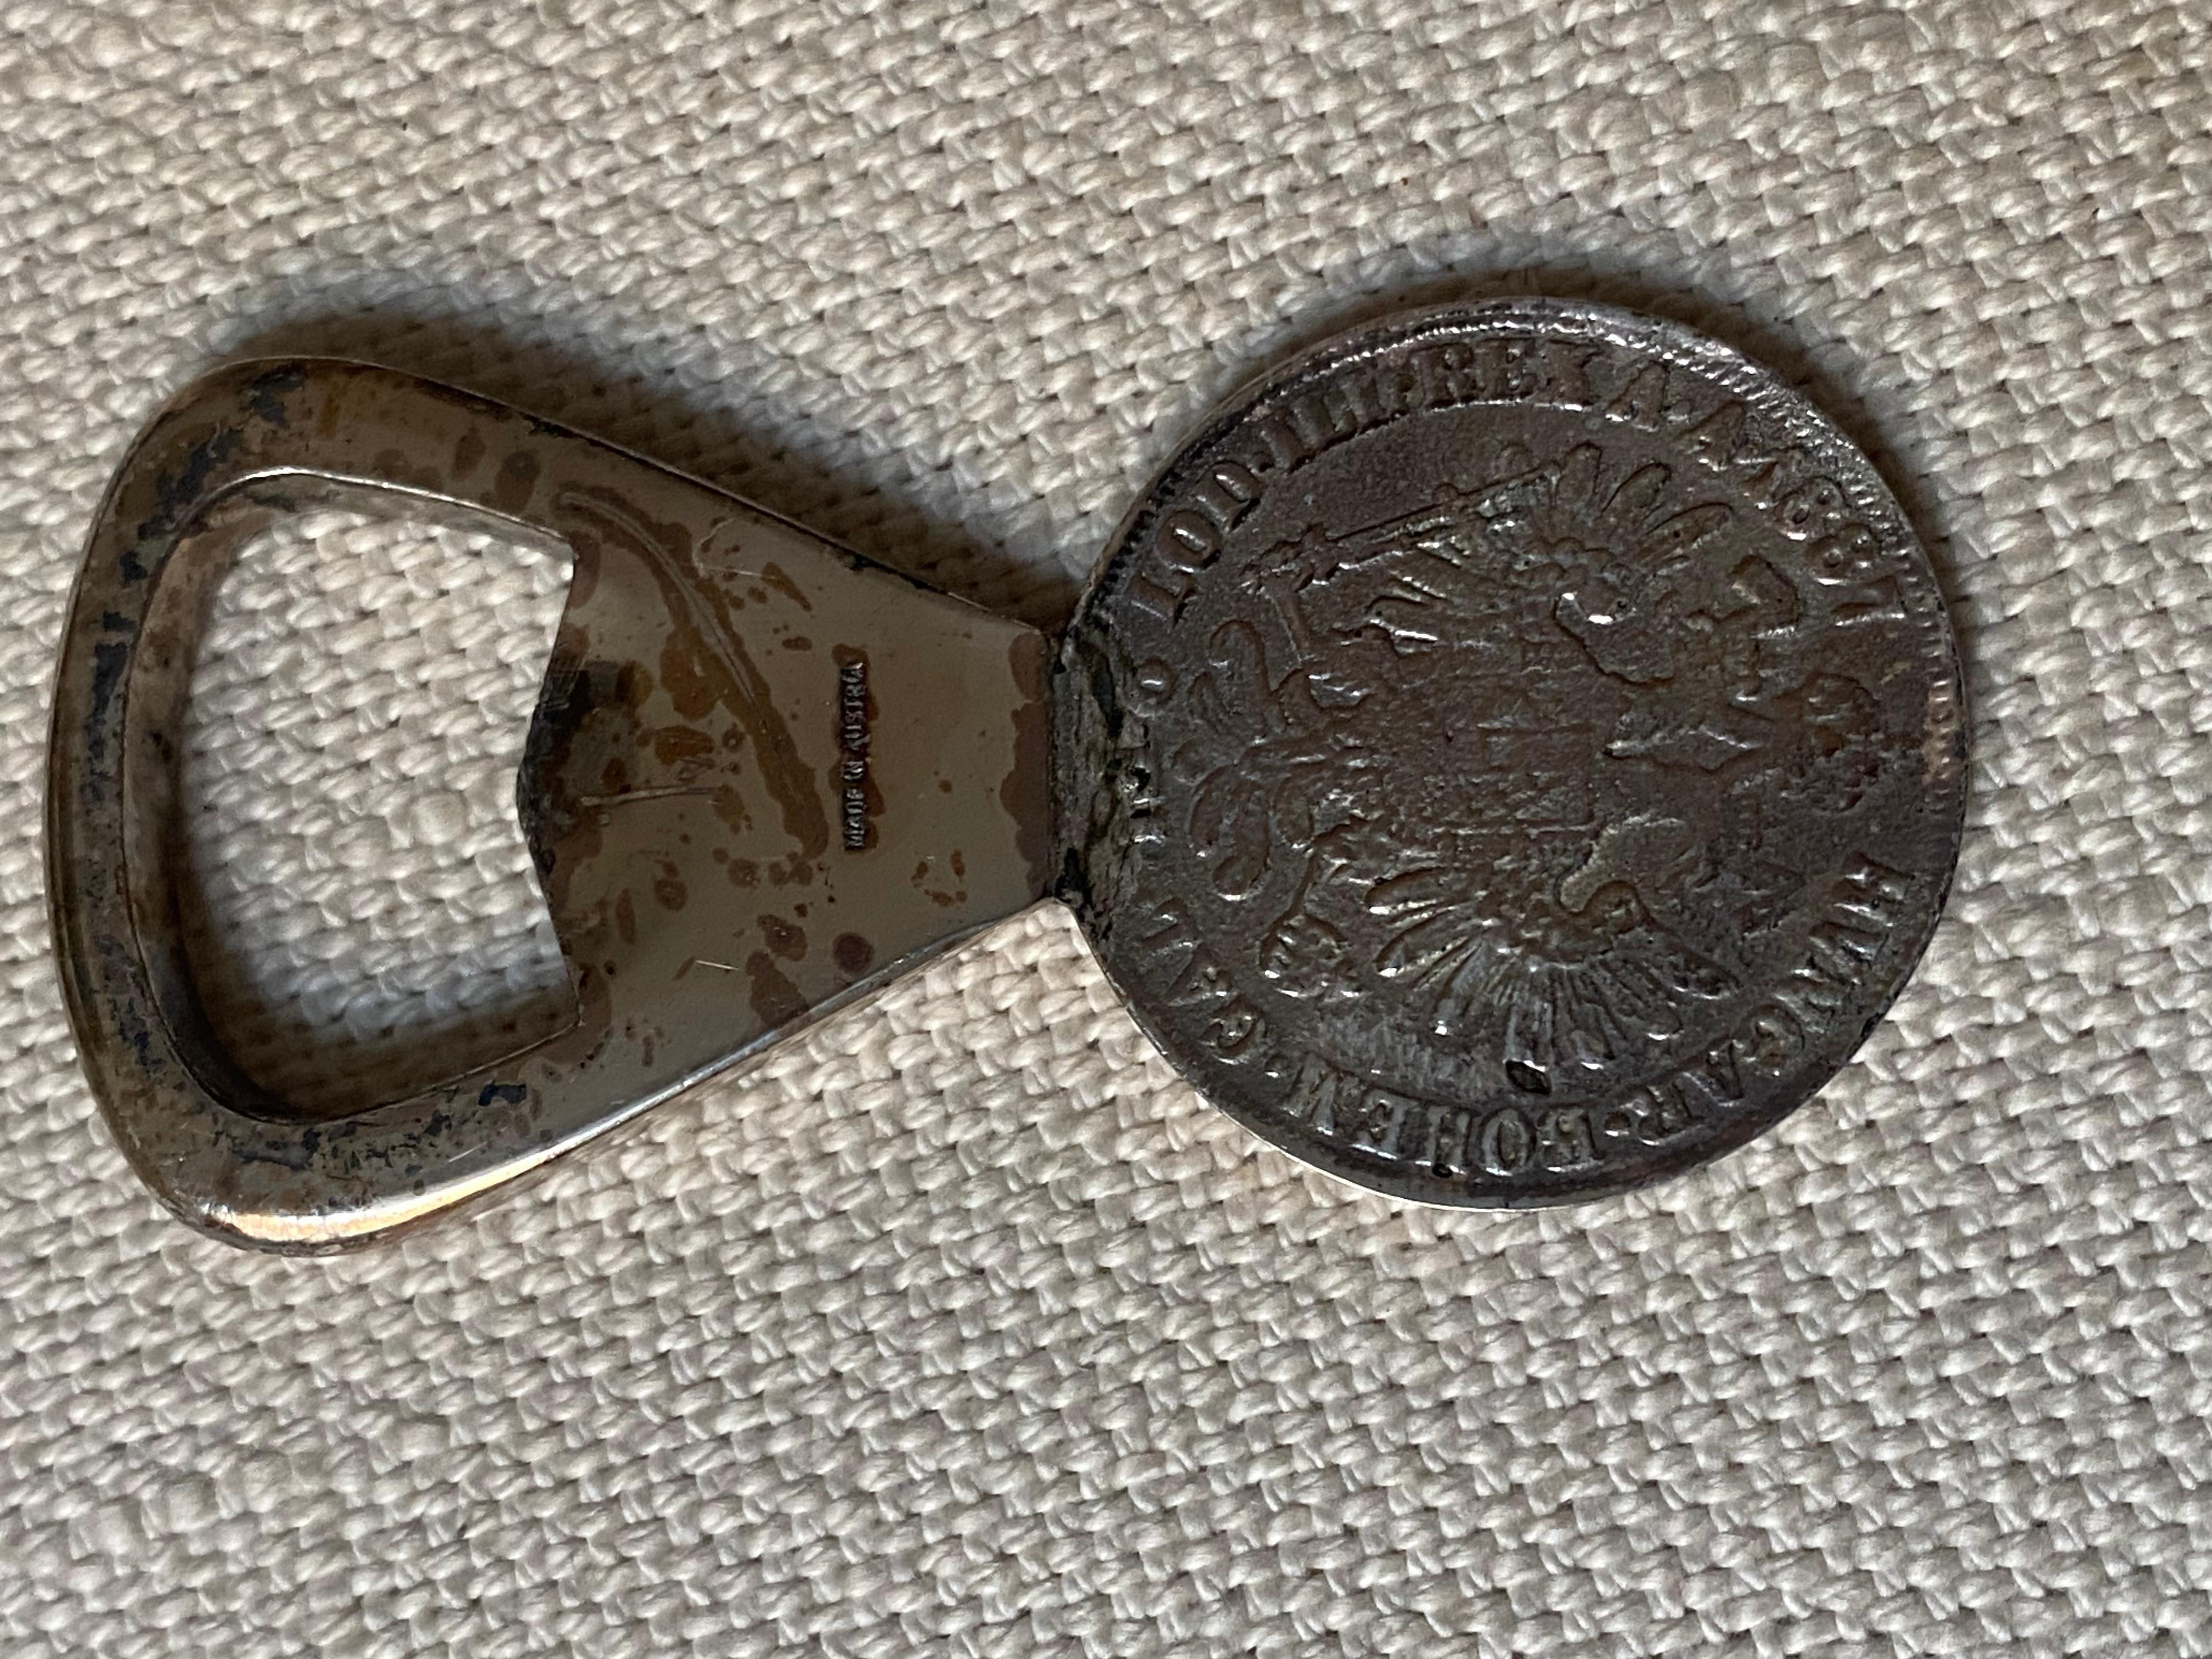 Silver plated brass coin bottle opener, incorporating a 2 florin coin, by Carl Auböck, circa 1950.
The front shows a Facsimile coin, dated 1881, with a portrait of Franz Joseph I facing right.
With an embossing on the bottle opener: 